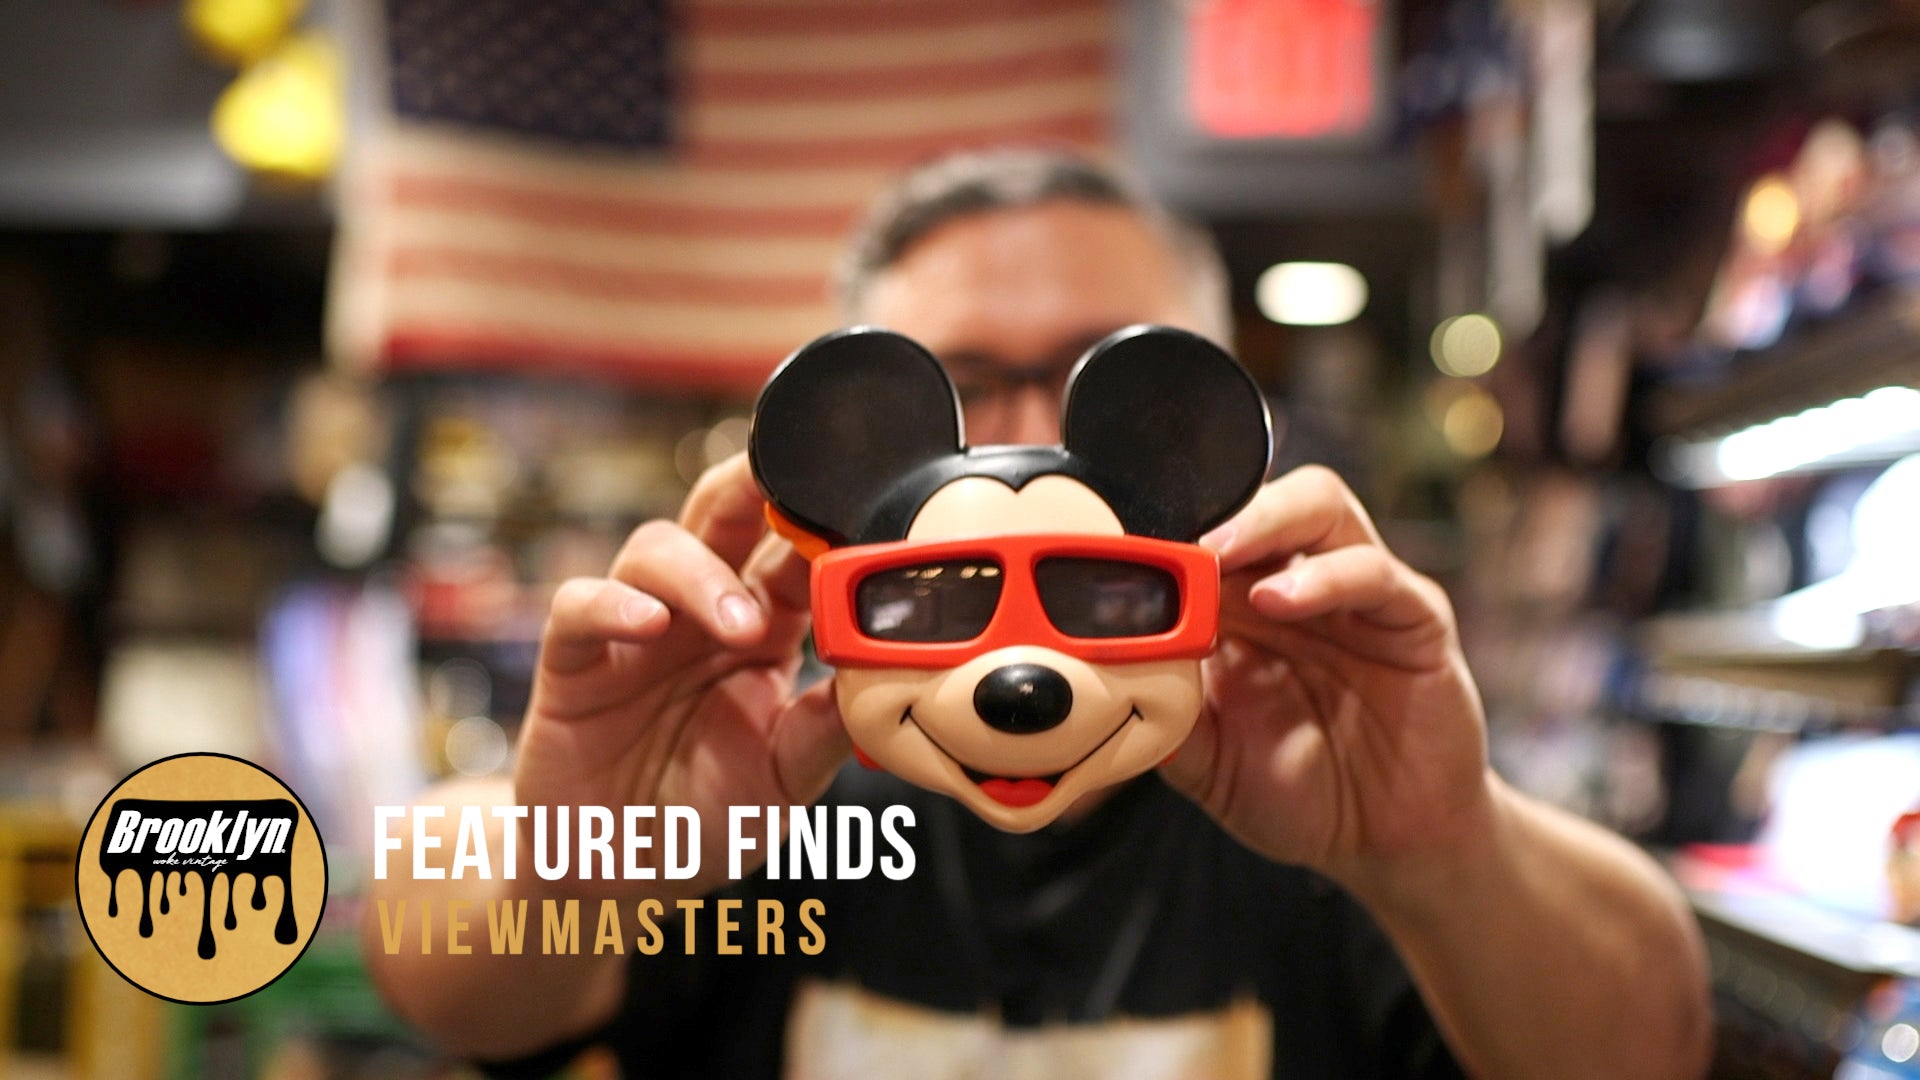 "Featured Finds” View-Masters